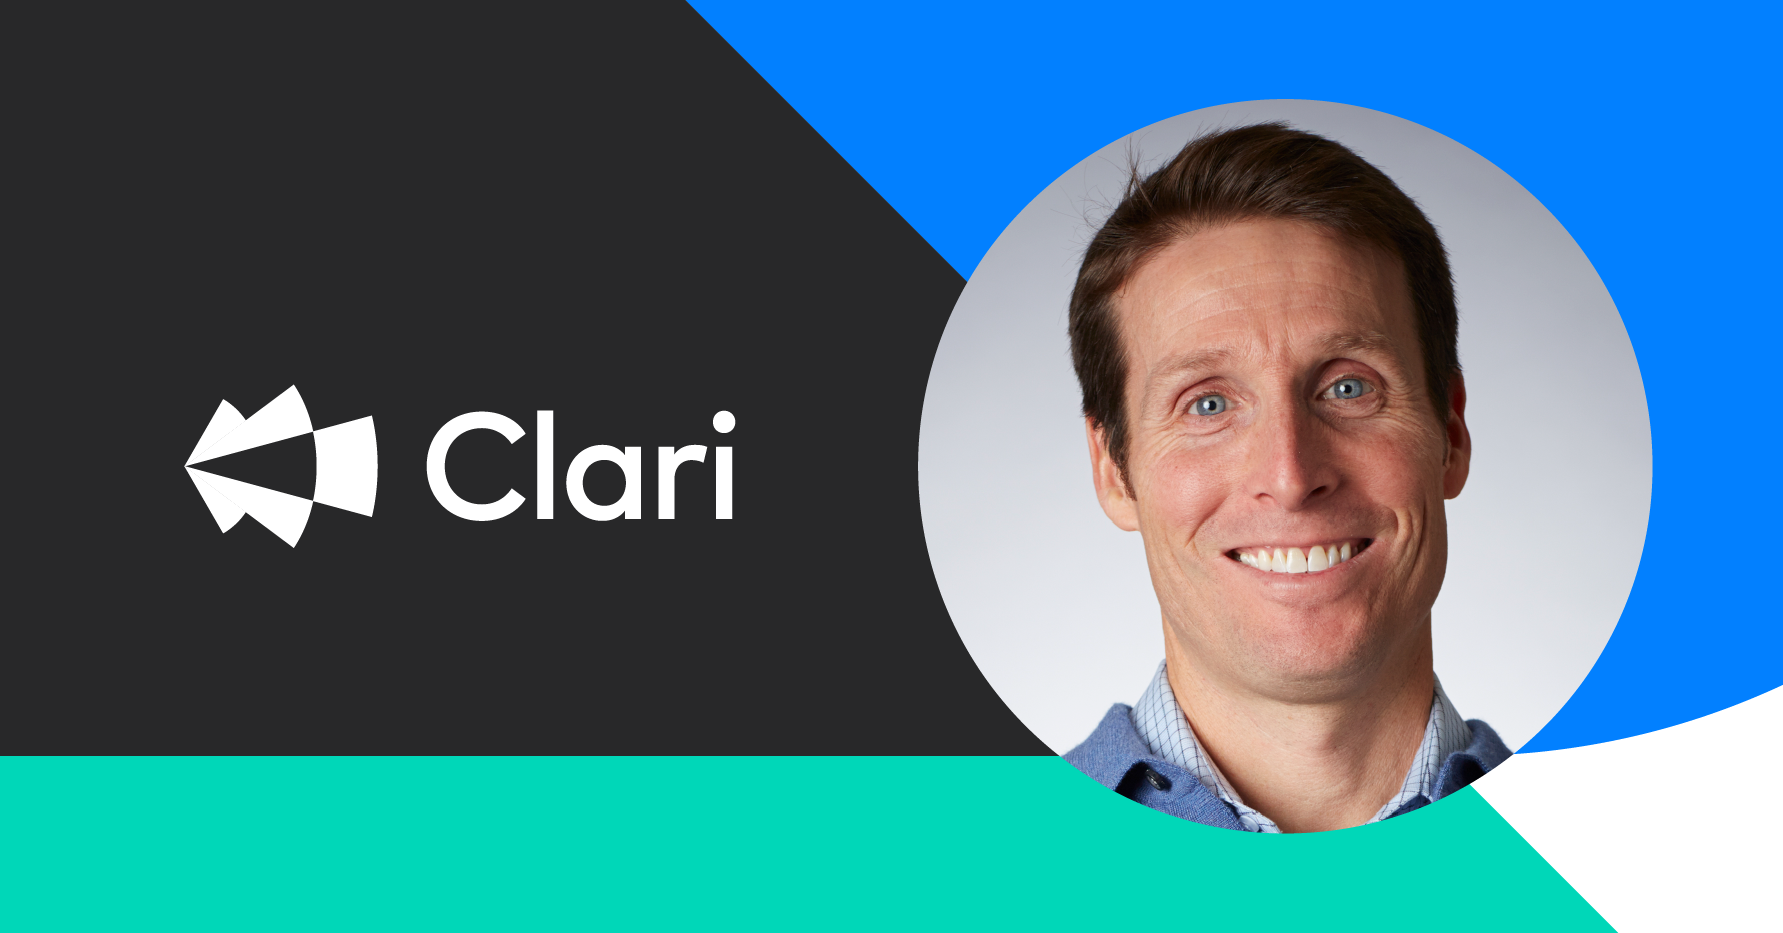 Banner image with Clari logo and headshot photograph of Andy Byrne, CEO of Clari